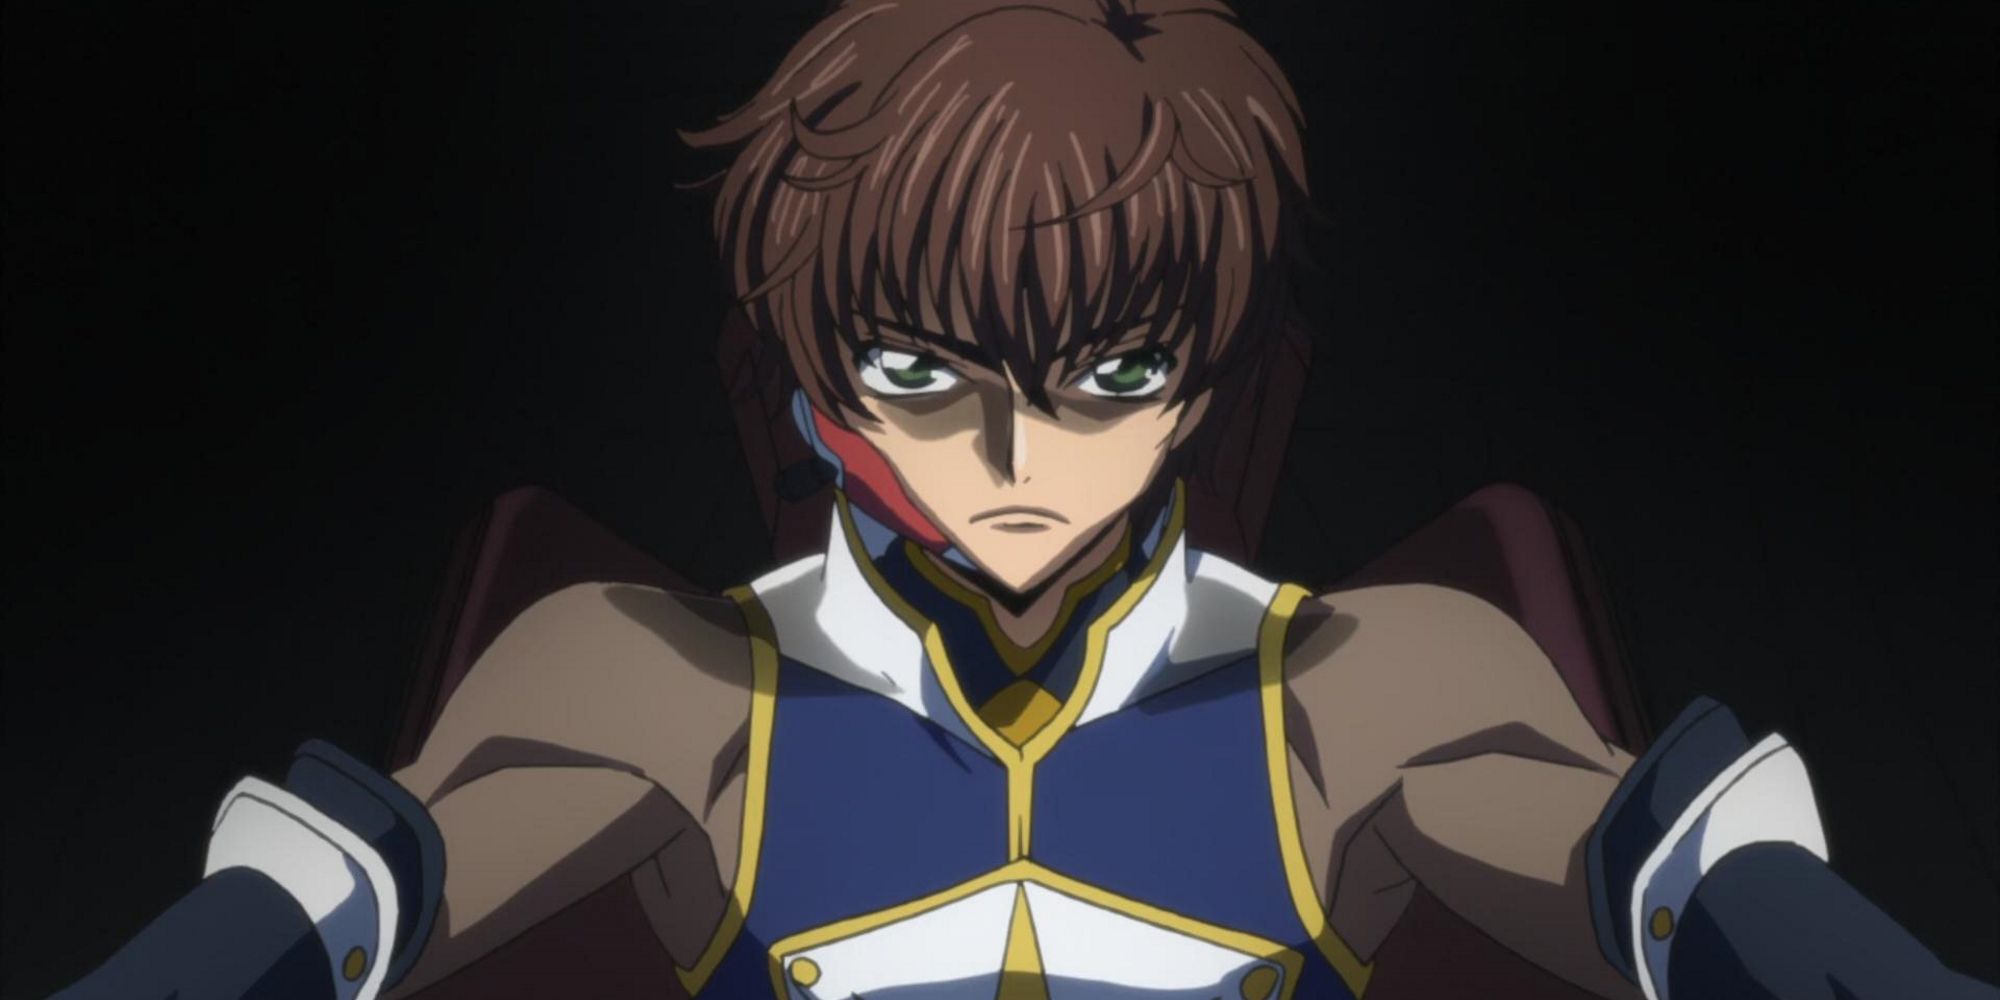 Every Main Character In Code Geass Sorted Into Their Hogwarts House Pioneernewz